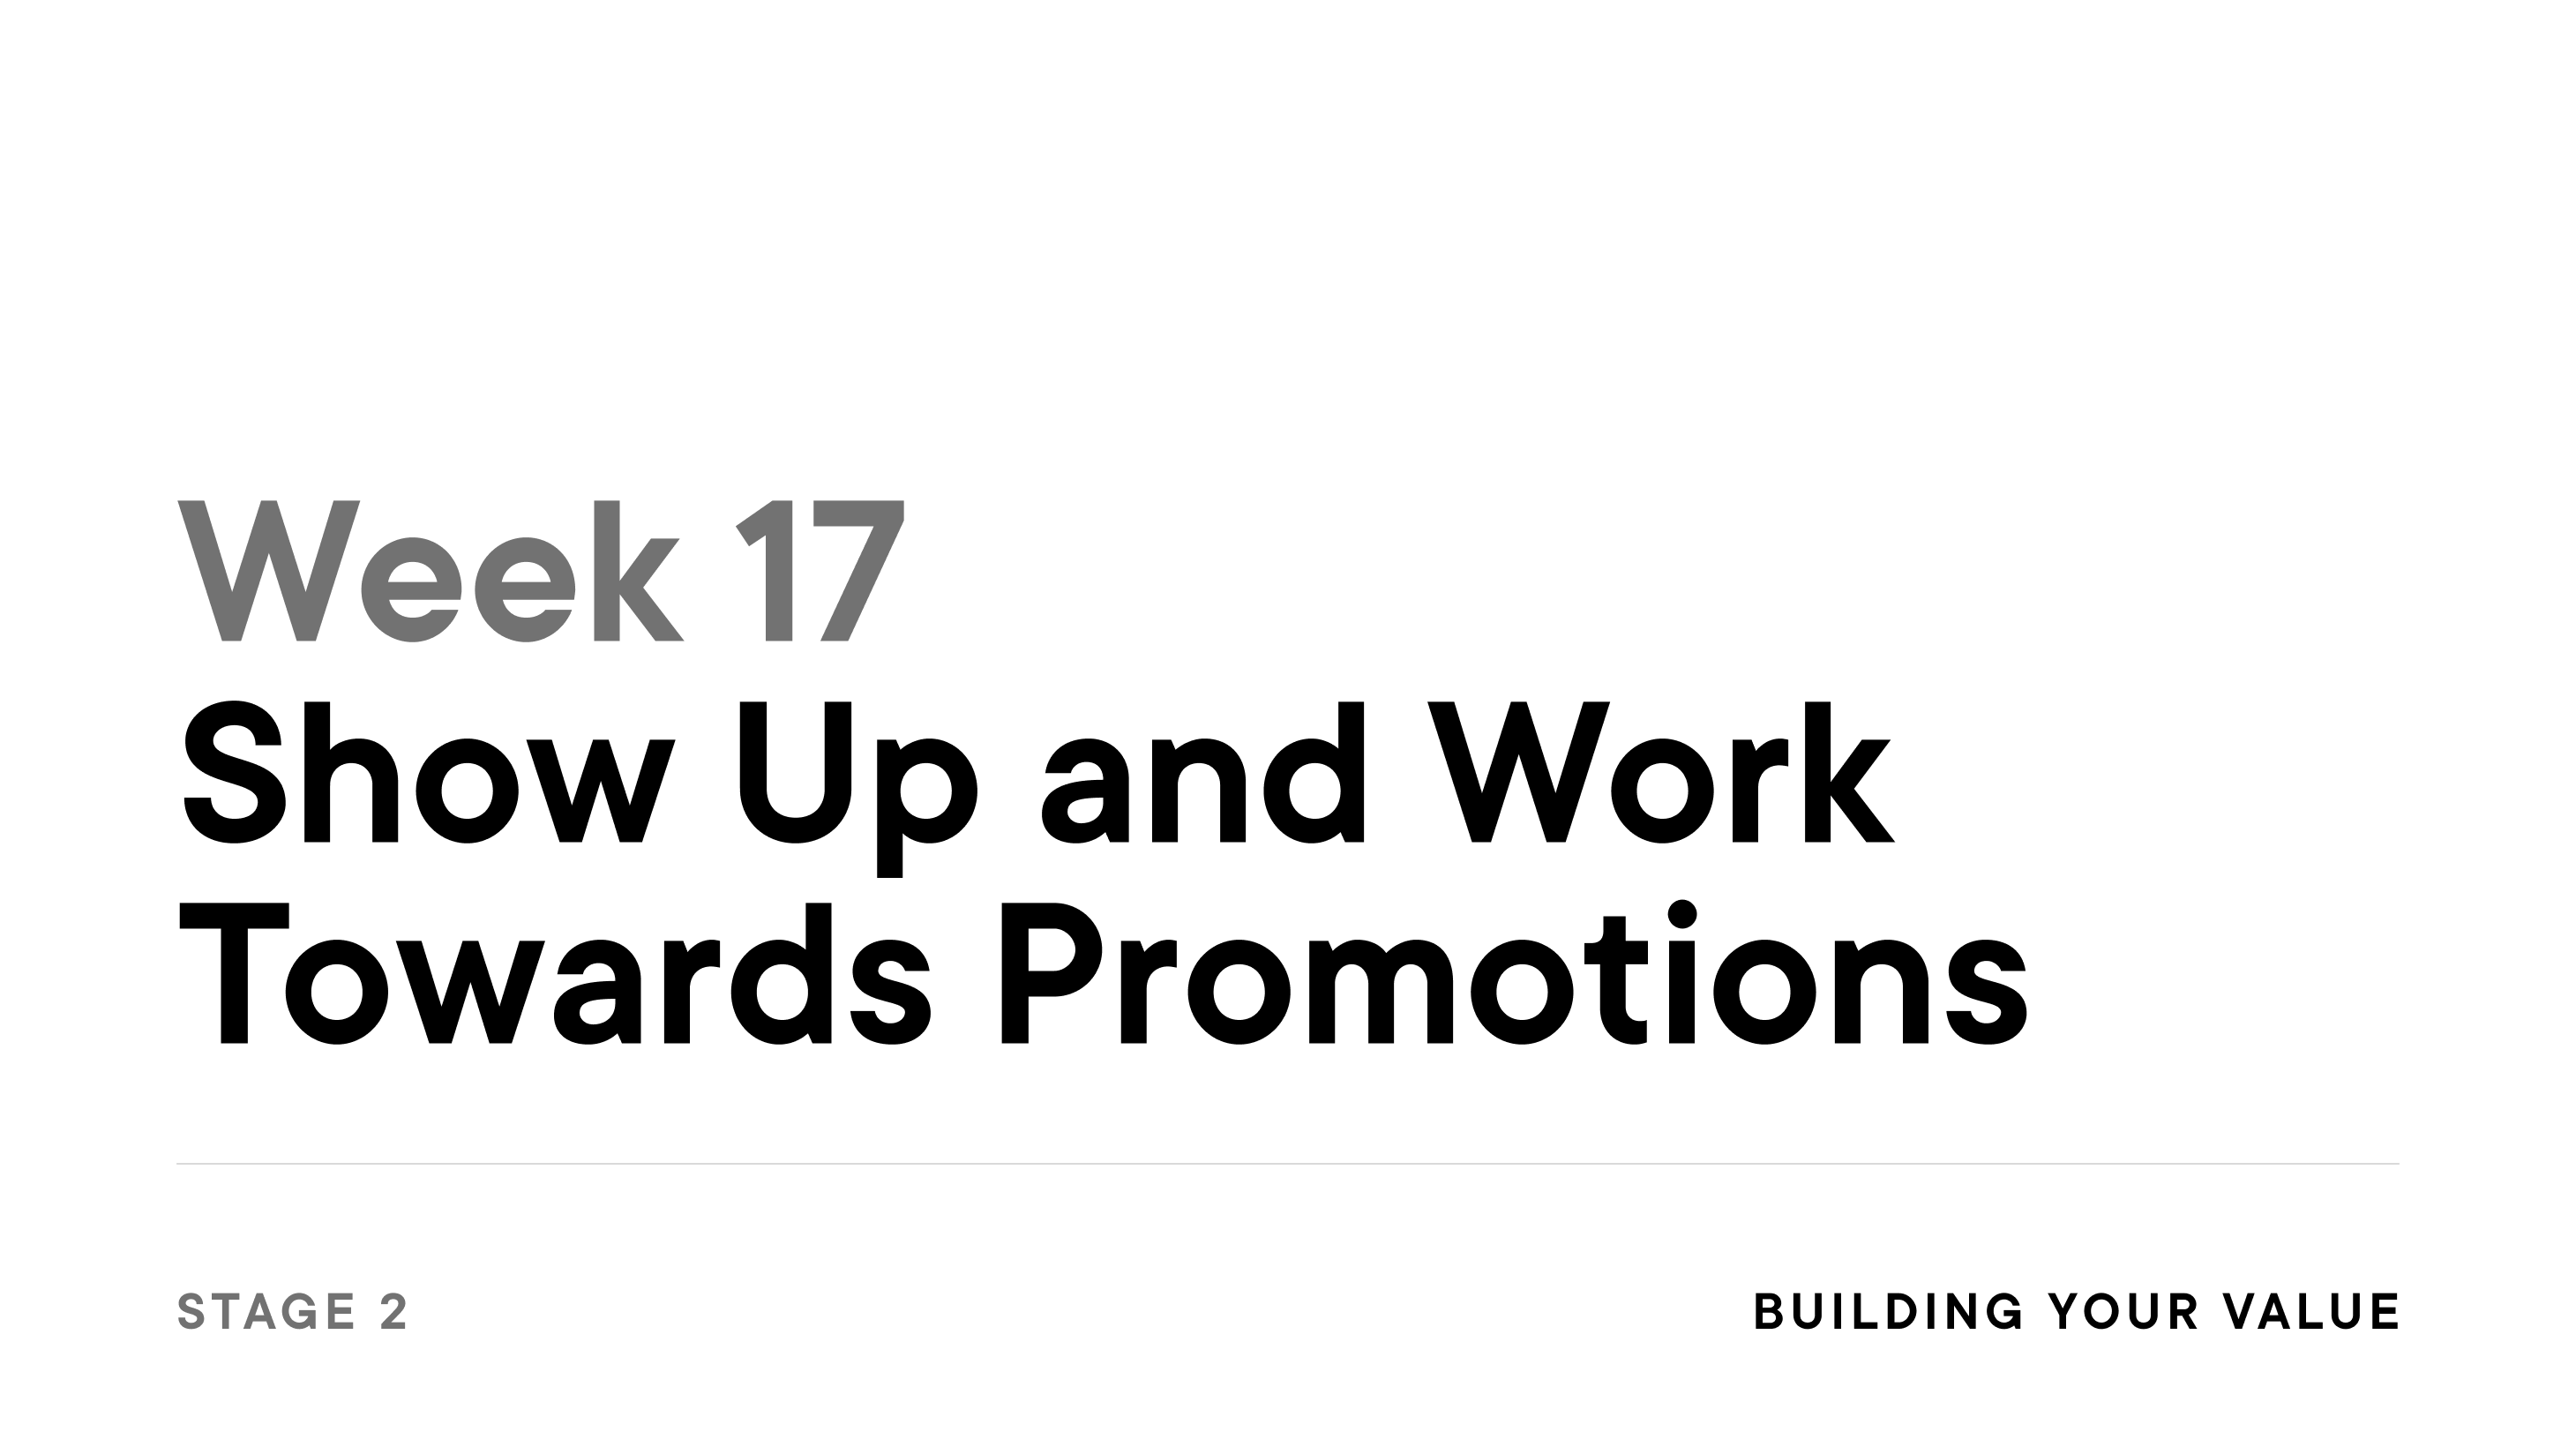 Week 17: Show Up and Work Towards Promotions